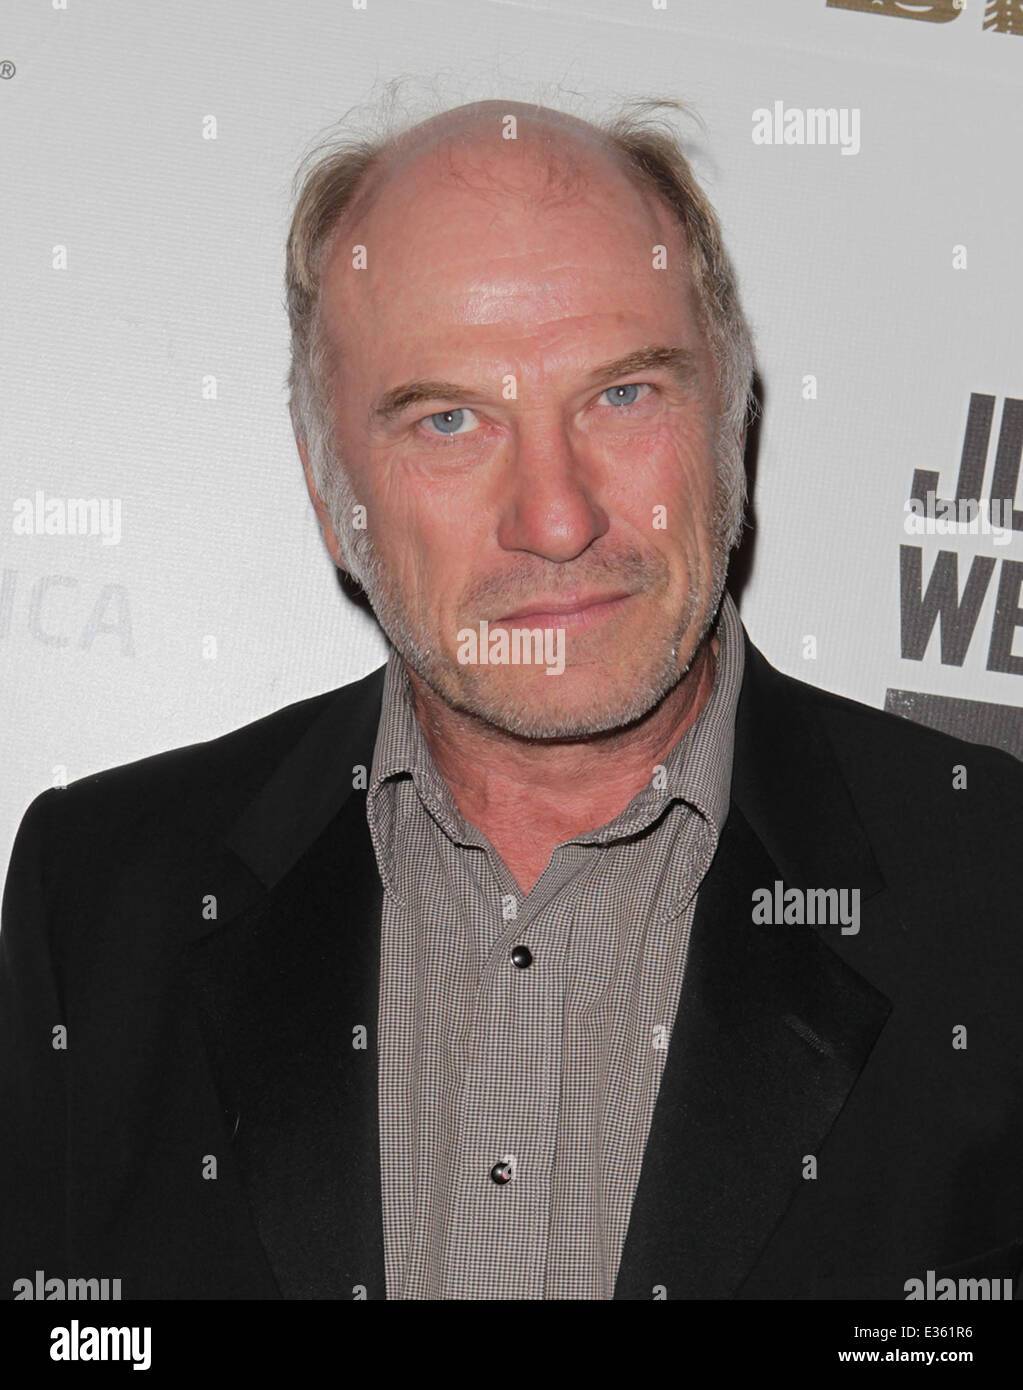 Premiere of FX's 'The Bridge' at DGA Theater - Arrivals  Featuring: Ted Levine Where: Los Angeles, California, United States When: 09 Jul 2013 Stock Photo